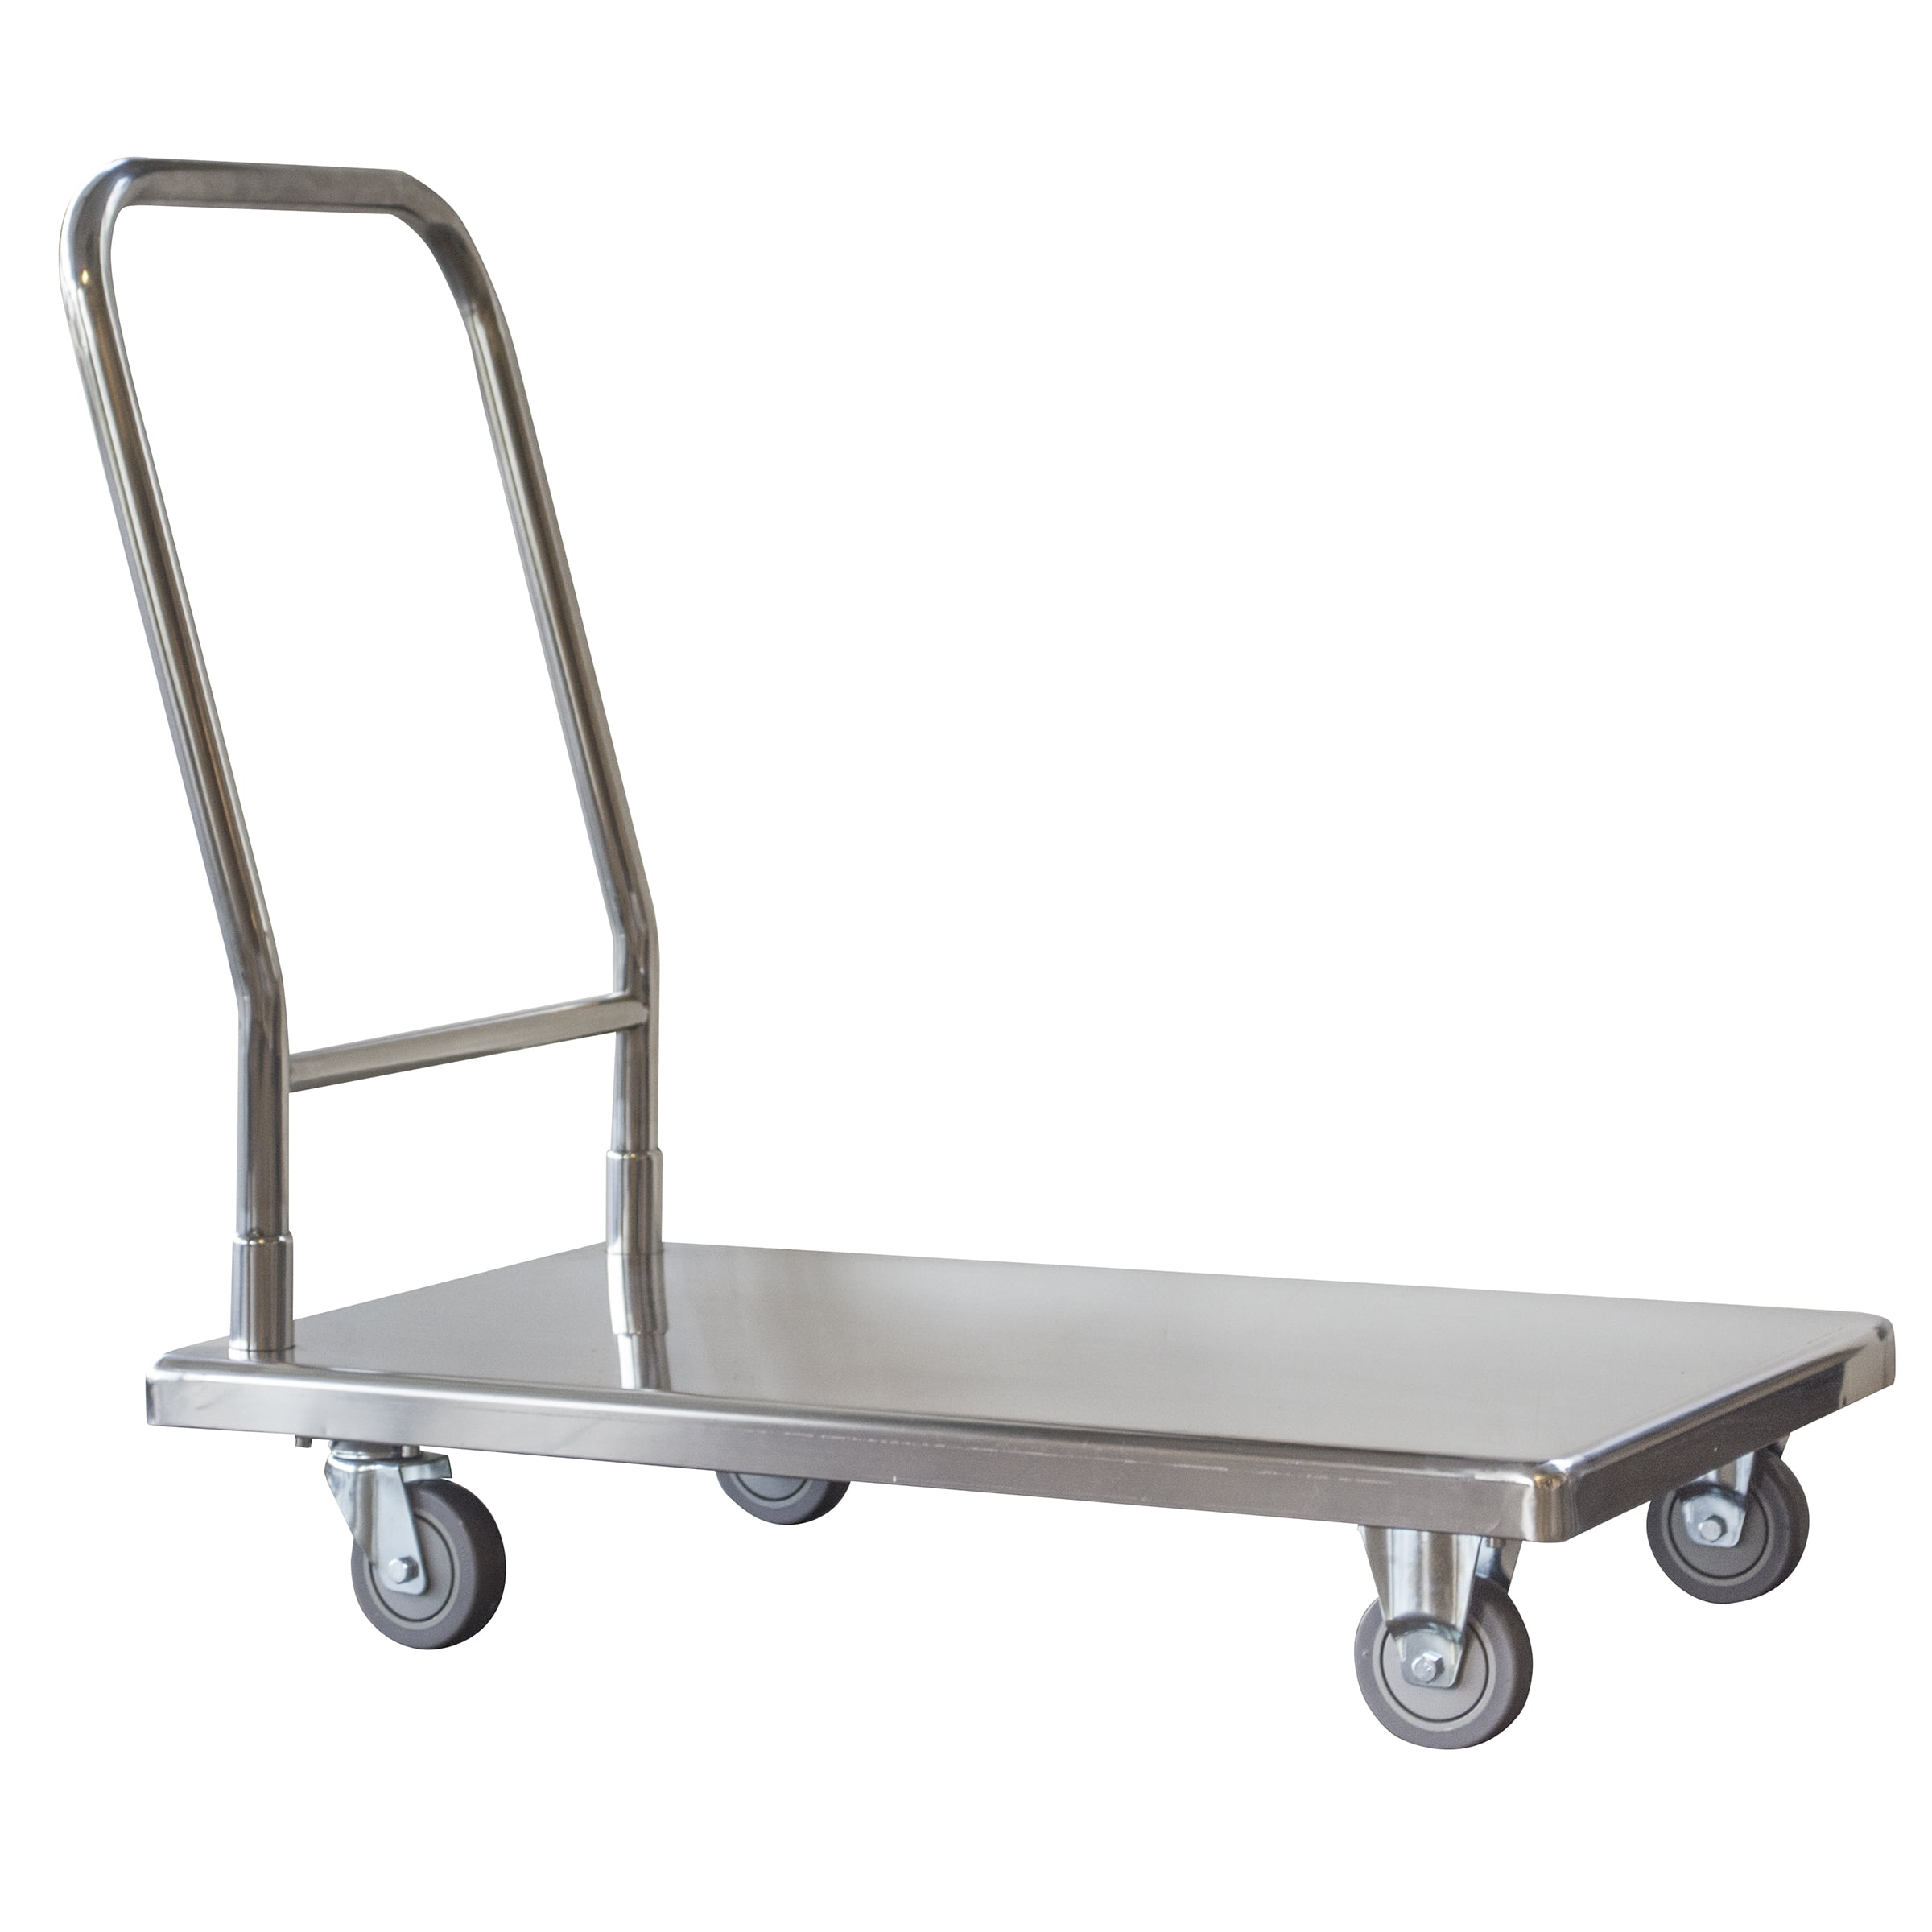 NEW Pro-Series Stainless Steel Platform Hand Truck 500 lbs Buffalo Tools Dolly 